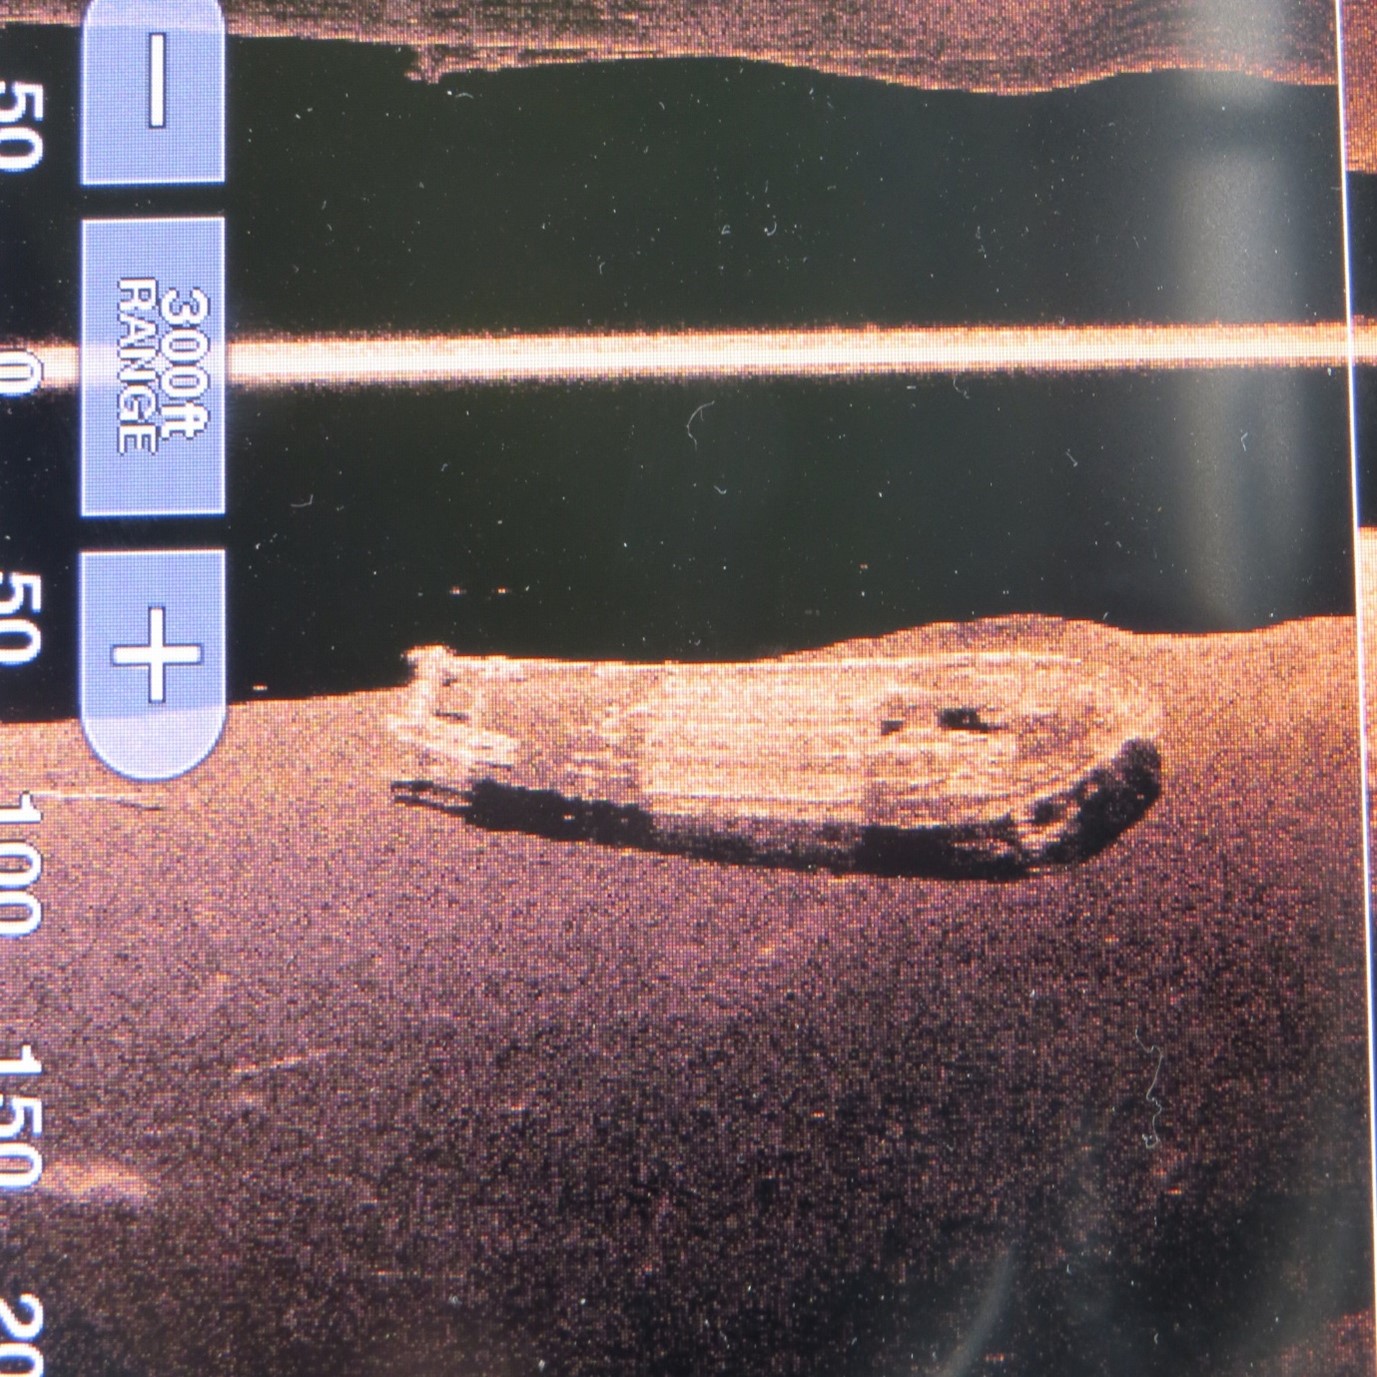 A side scan sonar image showing the outline of the hull of the Bonnington resting on the bottom of Upper Arrow Lake.